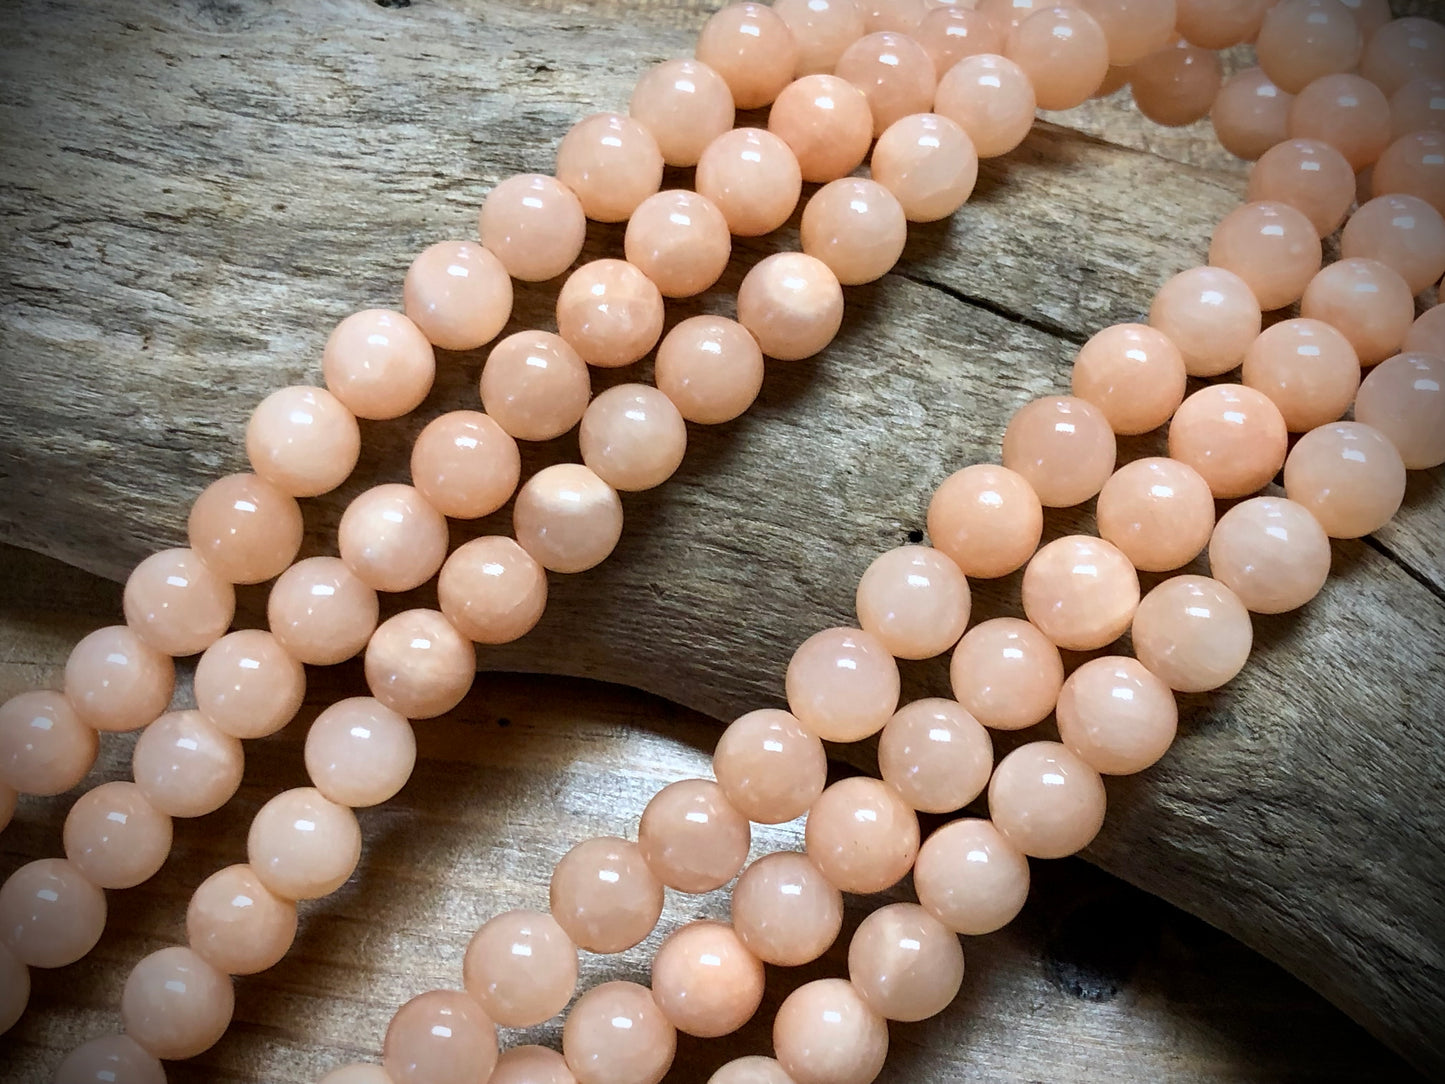 Dyed Jade Smooth Rounds - Peach - 8mm - 15.5"